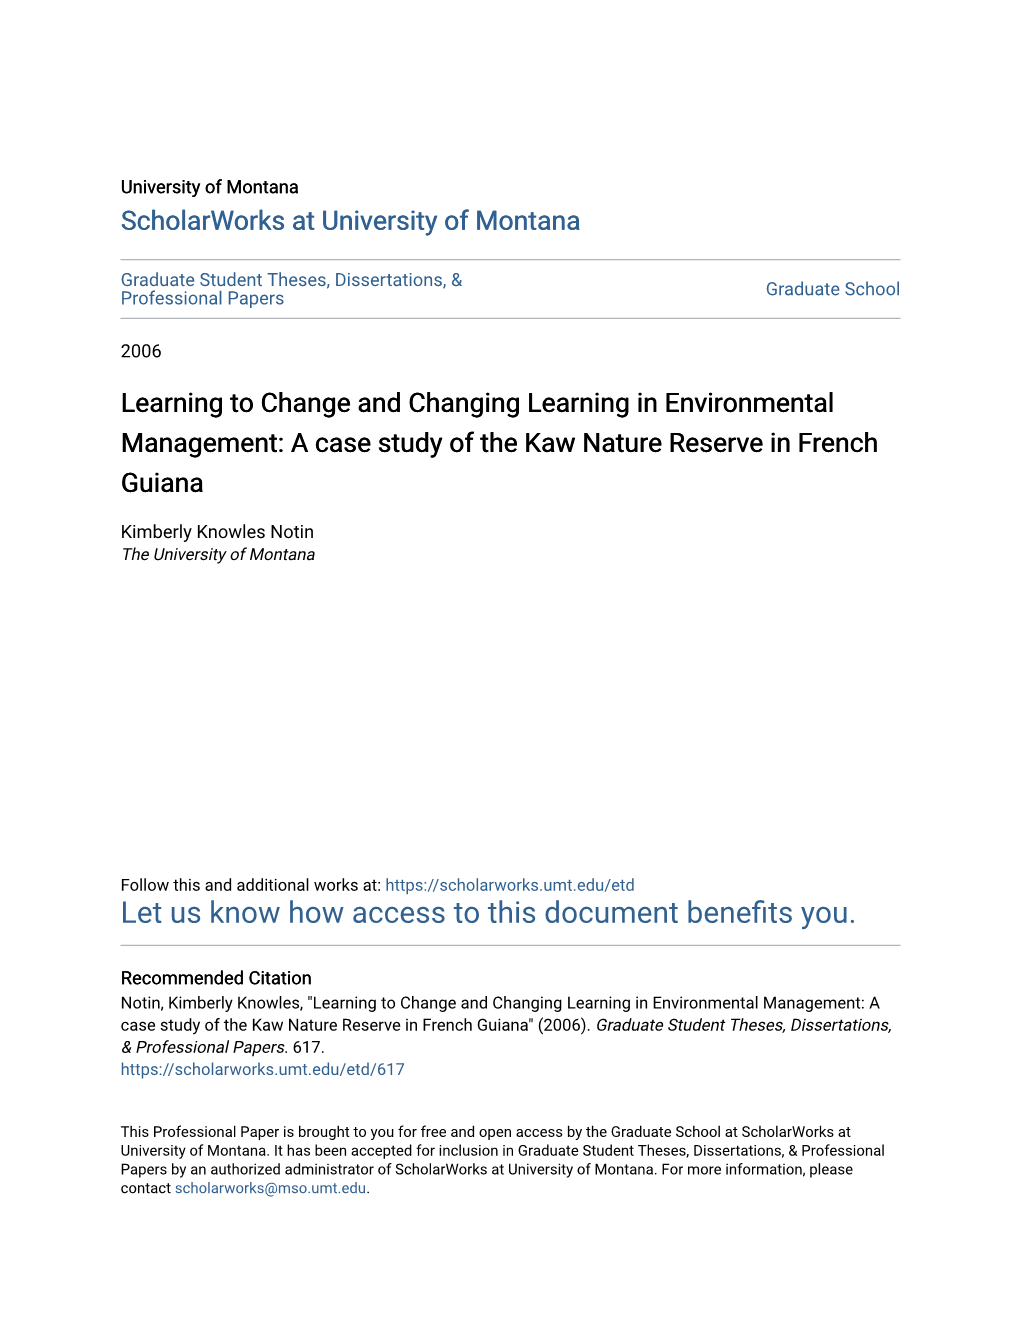 Learning to Change and Changing Learning in Environmental Management: a Case Study of the Kaw Nature Reserve in French Guiana